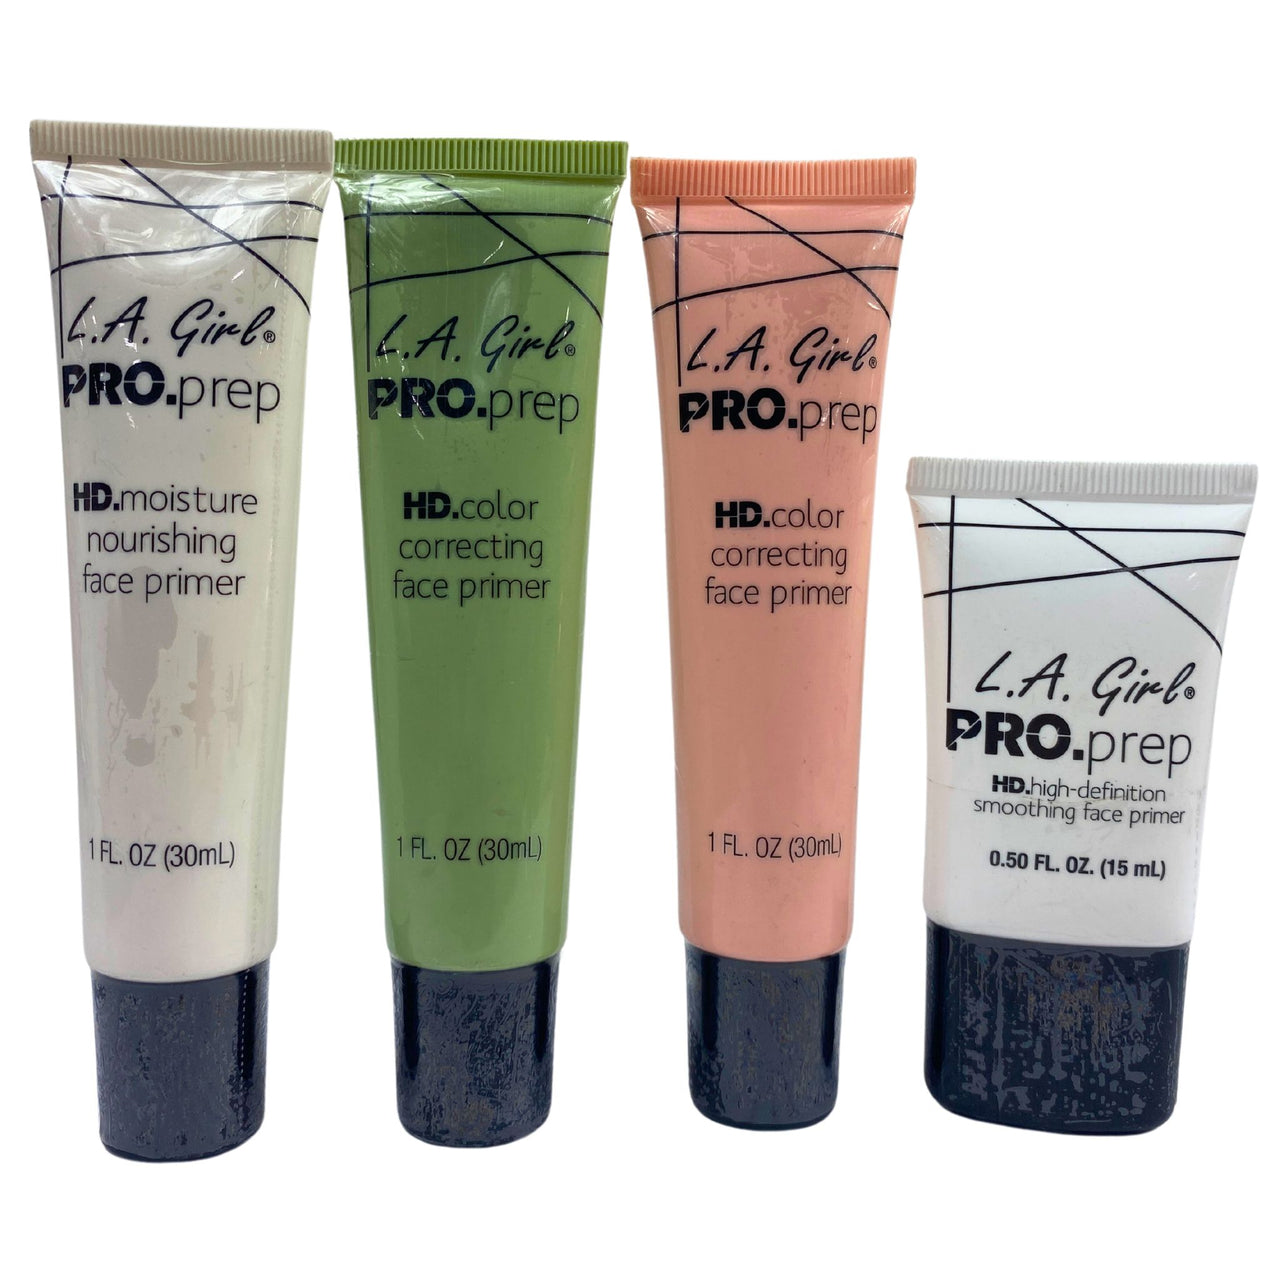 L.A.Girl Primers for Color Correcting, High Definition 